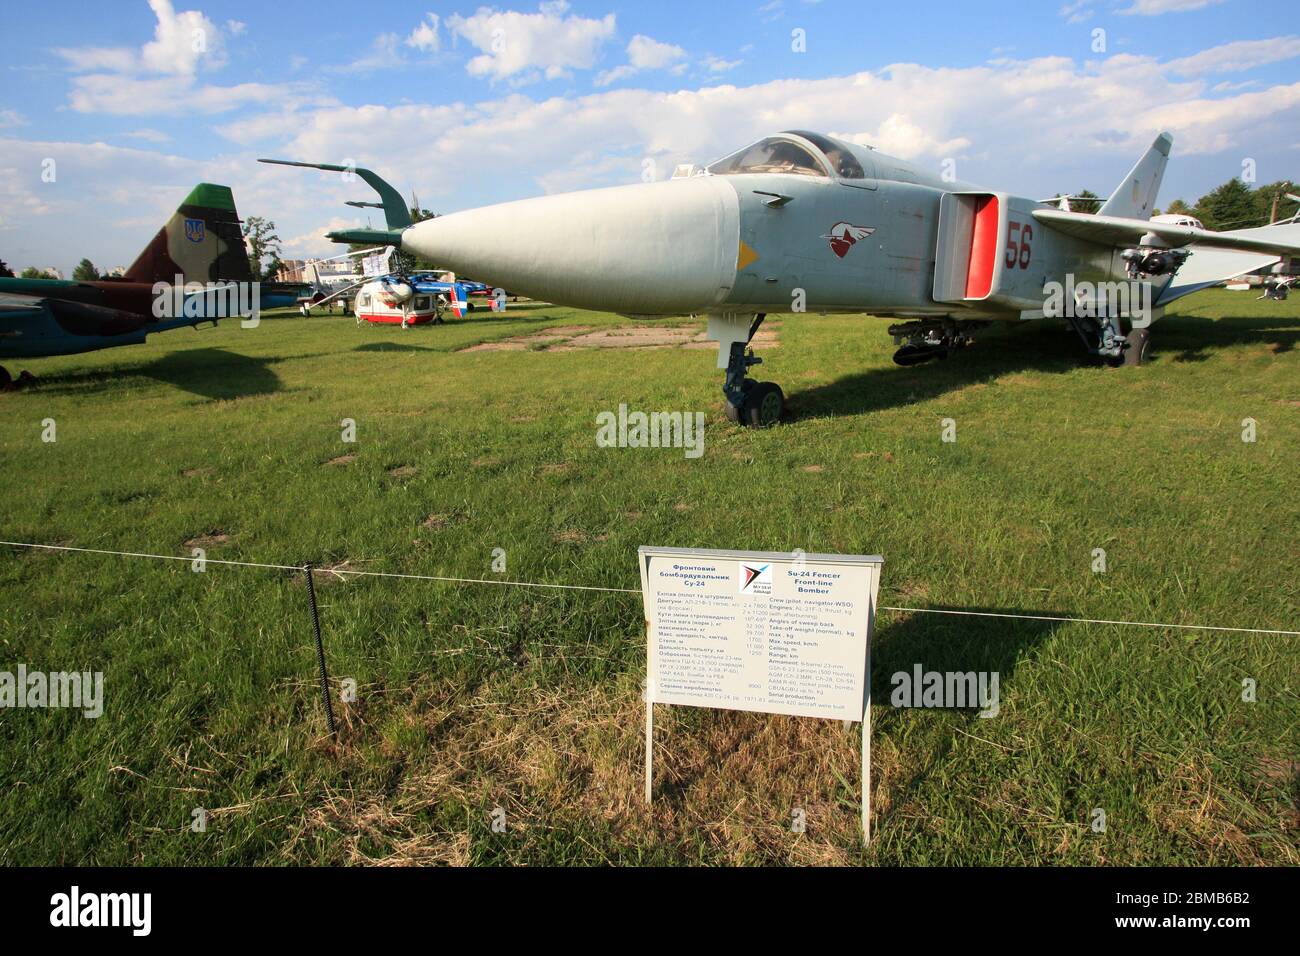 Exterior view of a Sukhoi Su-24 'Fencer' supersonic all-weather attack and bomber aircraft at the Zhulyany State Aviation Museum of Ukraine Stock Photo